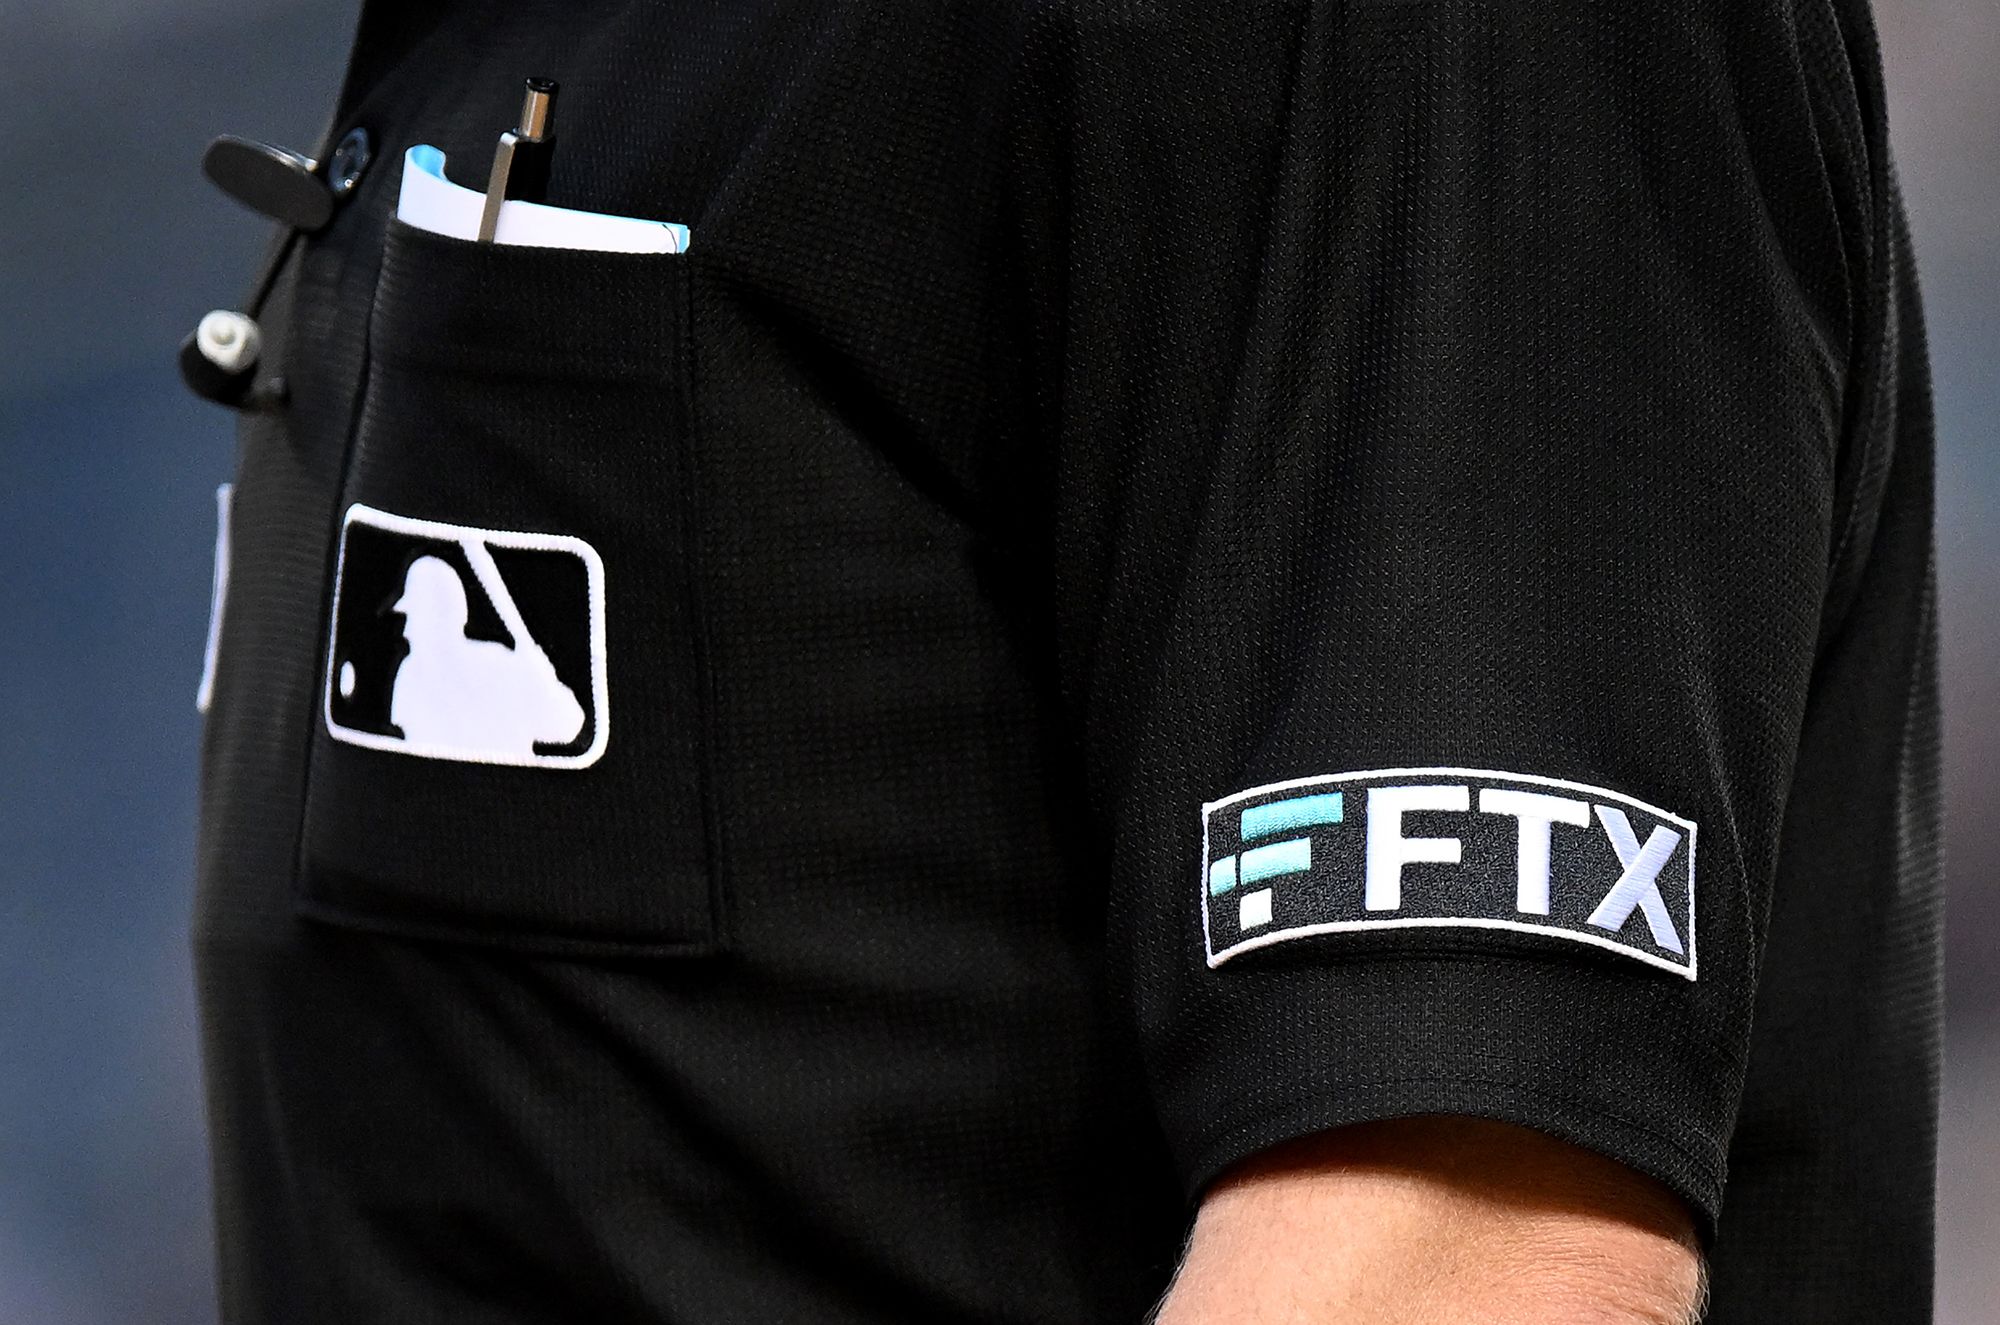 MLB Signs Cryptocurrency Deal with FTX – SportsTravel